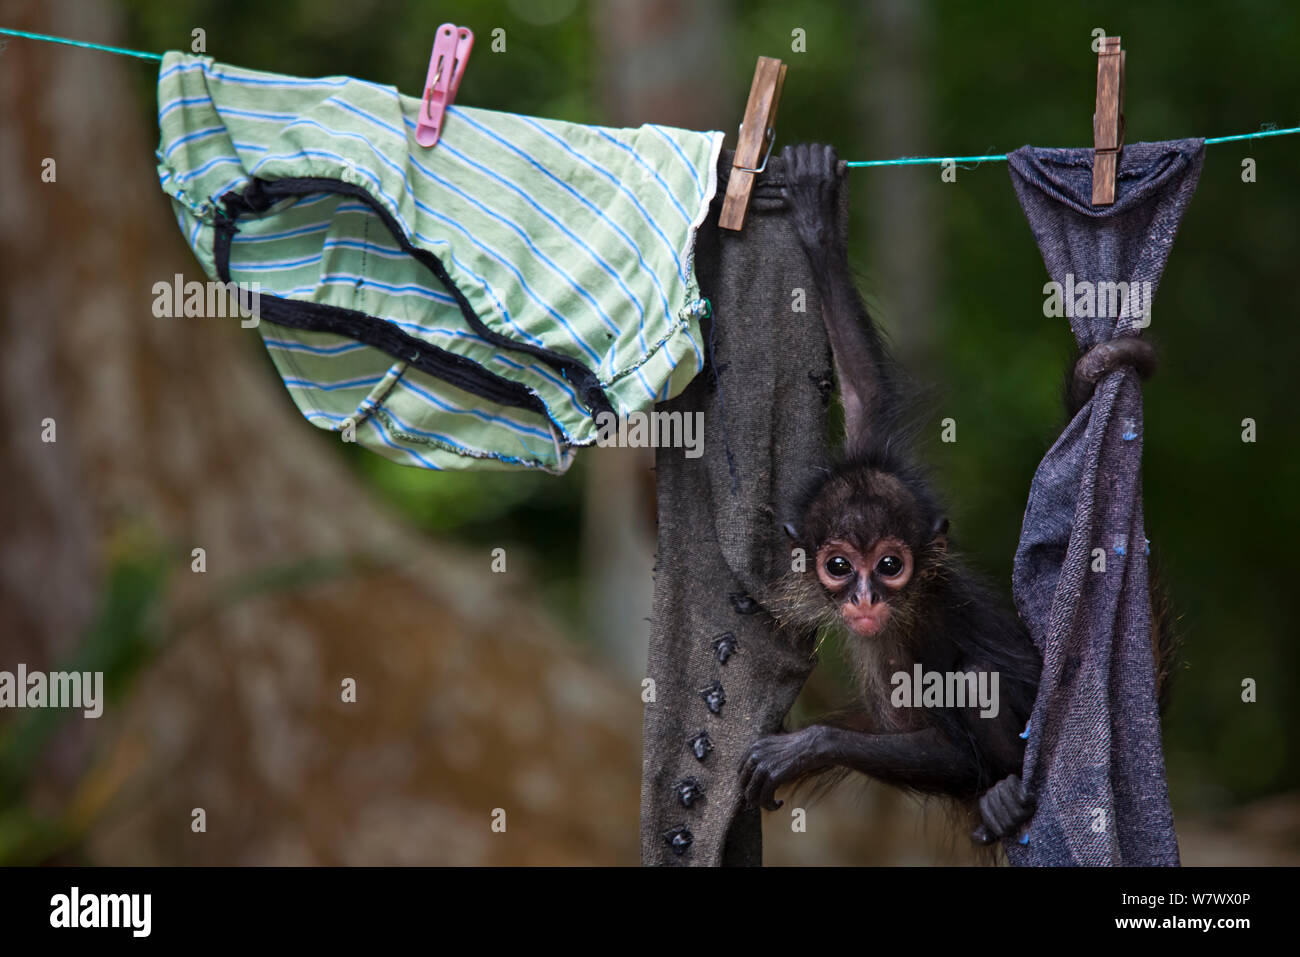 Central American spider monkey (Ateles geoffroyi) orphan hanging on washing line. Baby monkey was kept as pet by workers at El Mirador base camp, after mother was killed. Selva Maya Biosphere Reserve, Peten region, Guatemala. Endangered species. Stock Photo